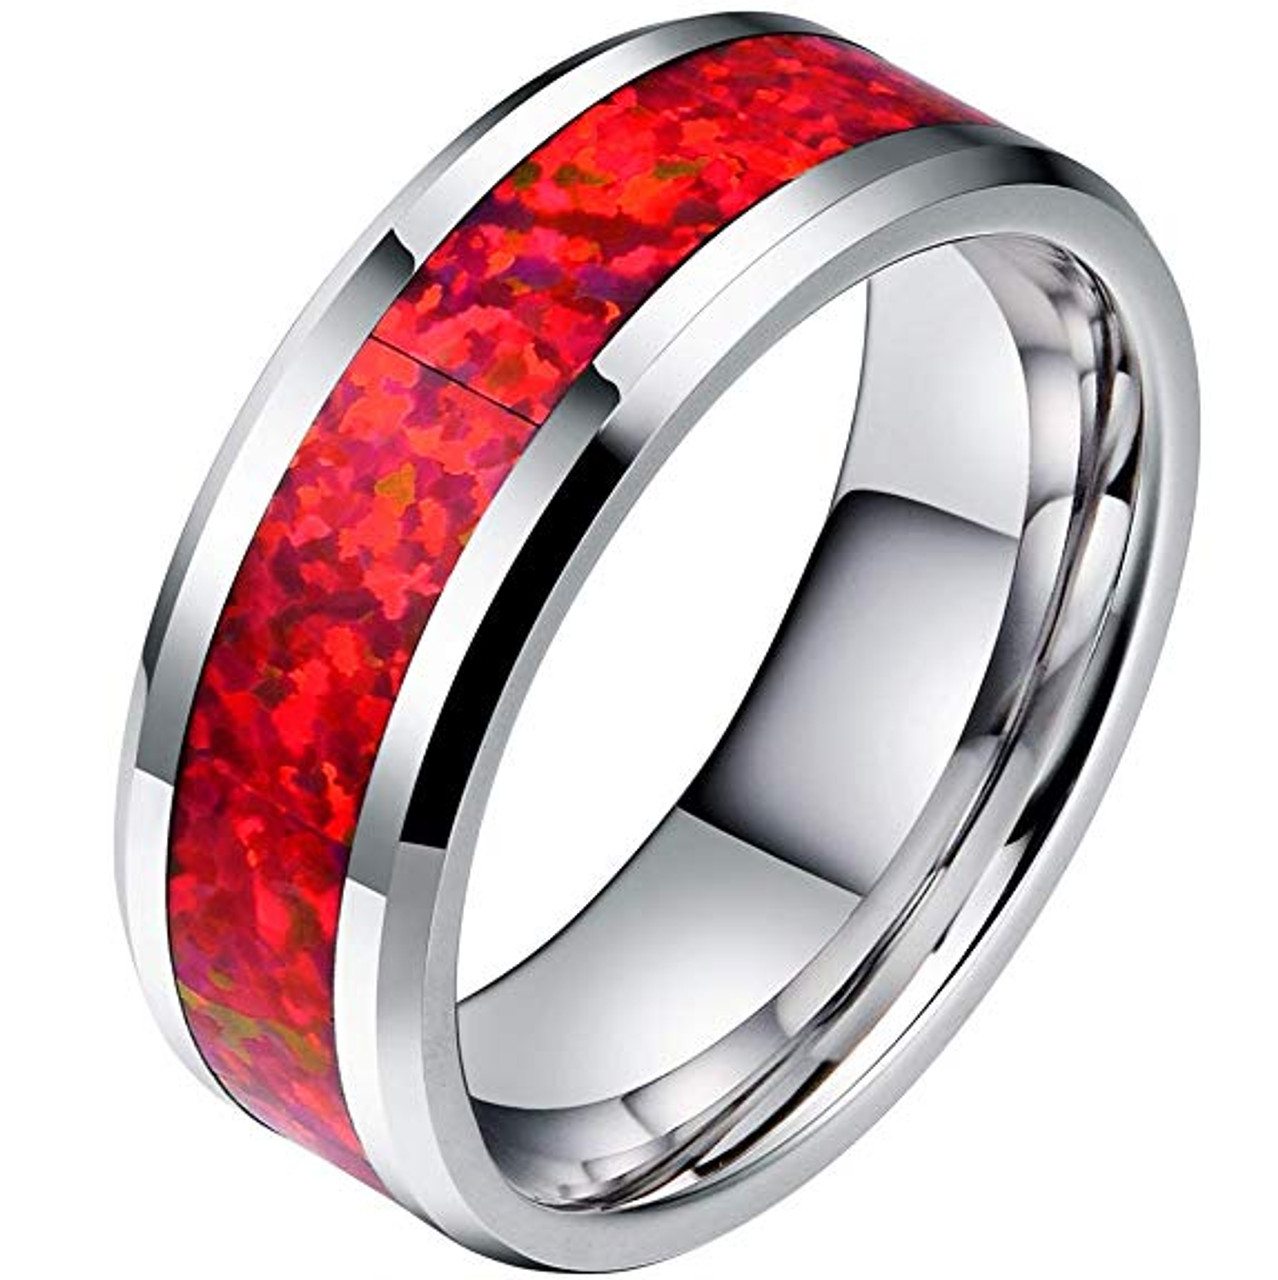 (8mm)  Unisex or Men's Red Opal Inlay Mens Tungsten Carbide Wedding ring band Ring. Silver Tone Wedding ring band Comfort Fit High Polished Tungsten Carbide